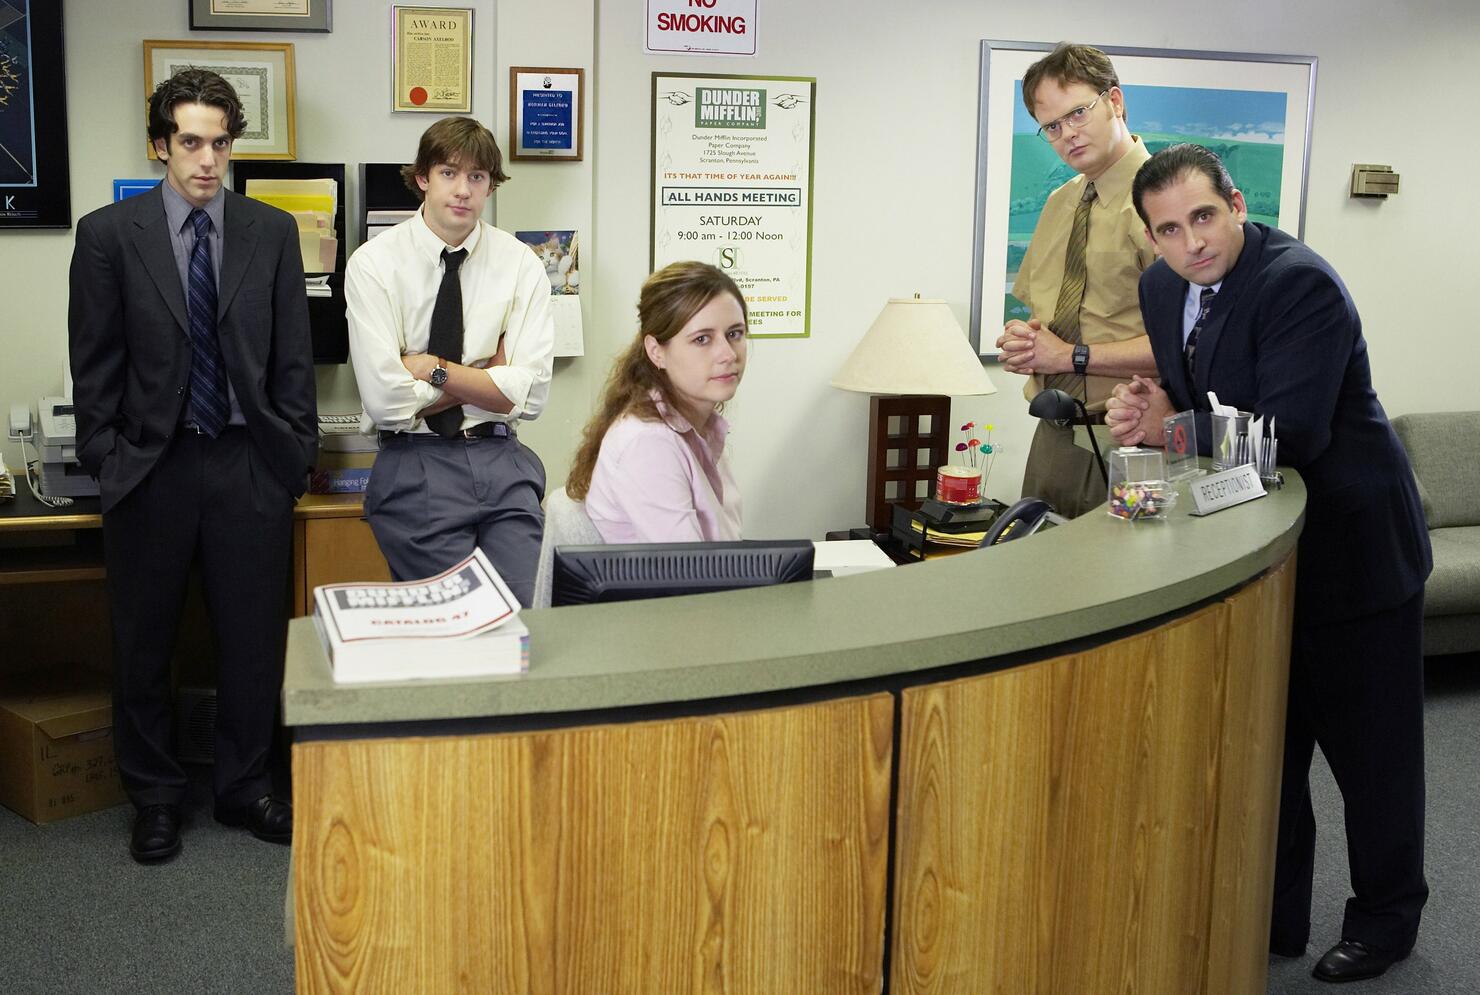 DUNDER MIFFLIN, THIS IS PAM